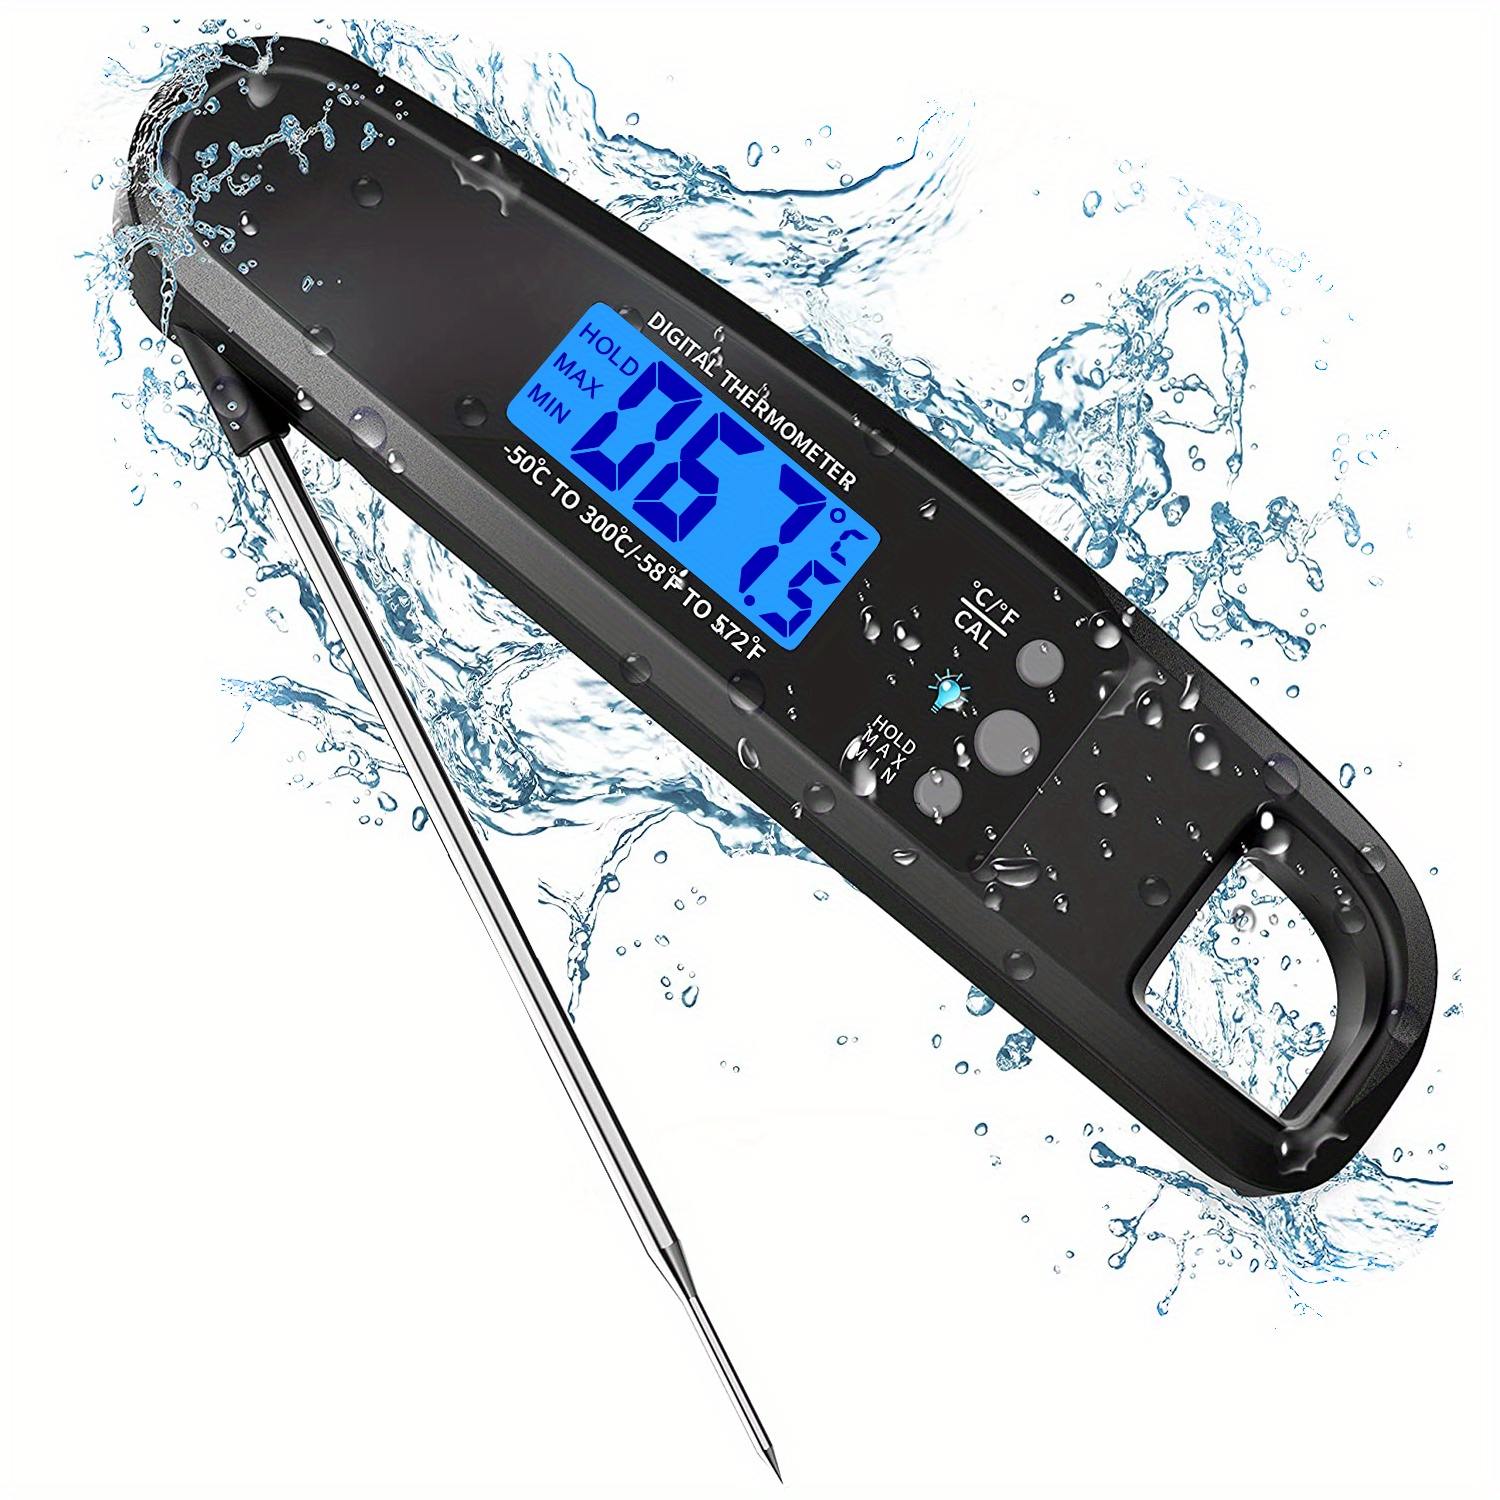 Expert Grill Pocket Digital Instant Read Meat Grilling Thermometer